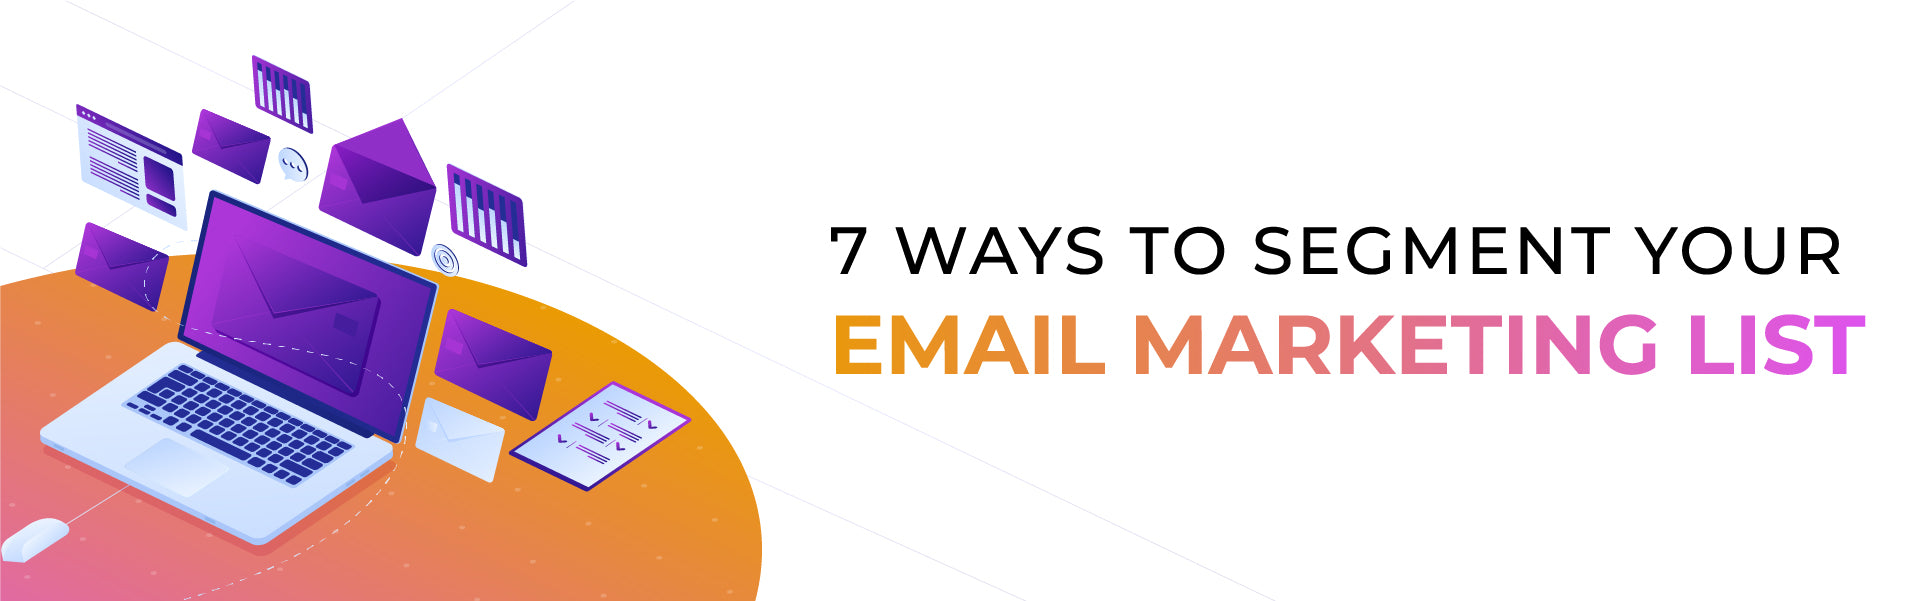 7 Ways to Segment Your Email Marketing List